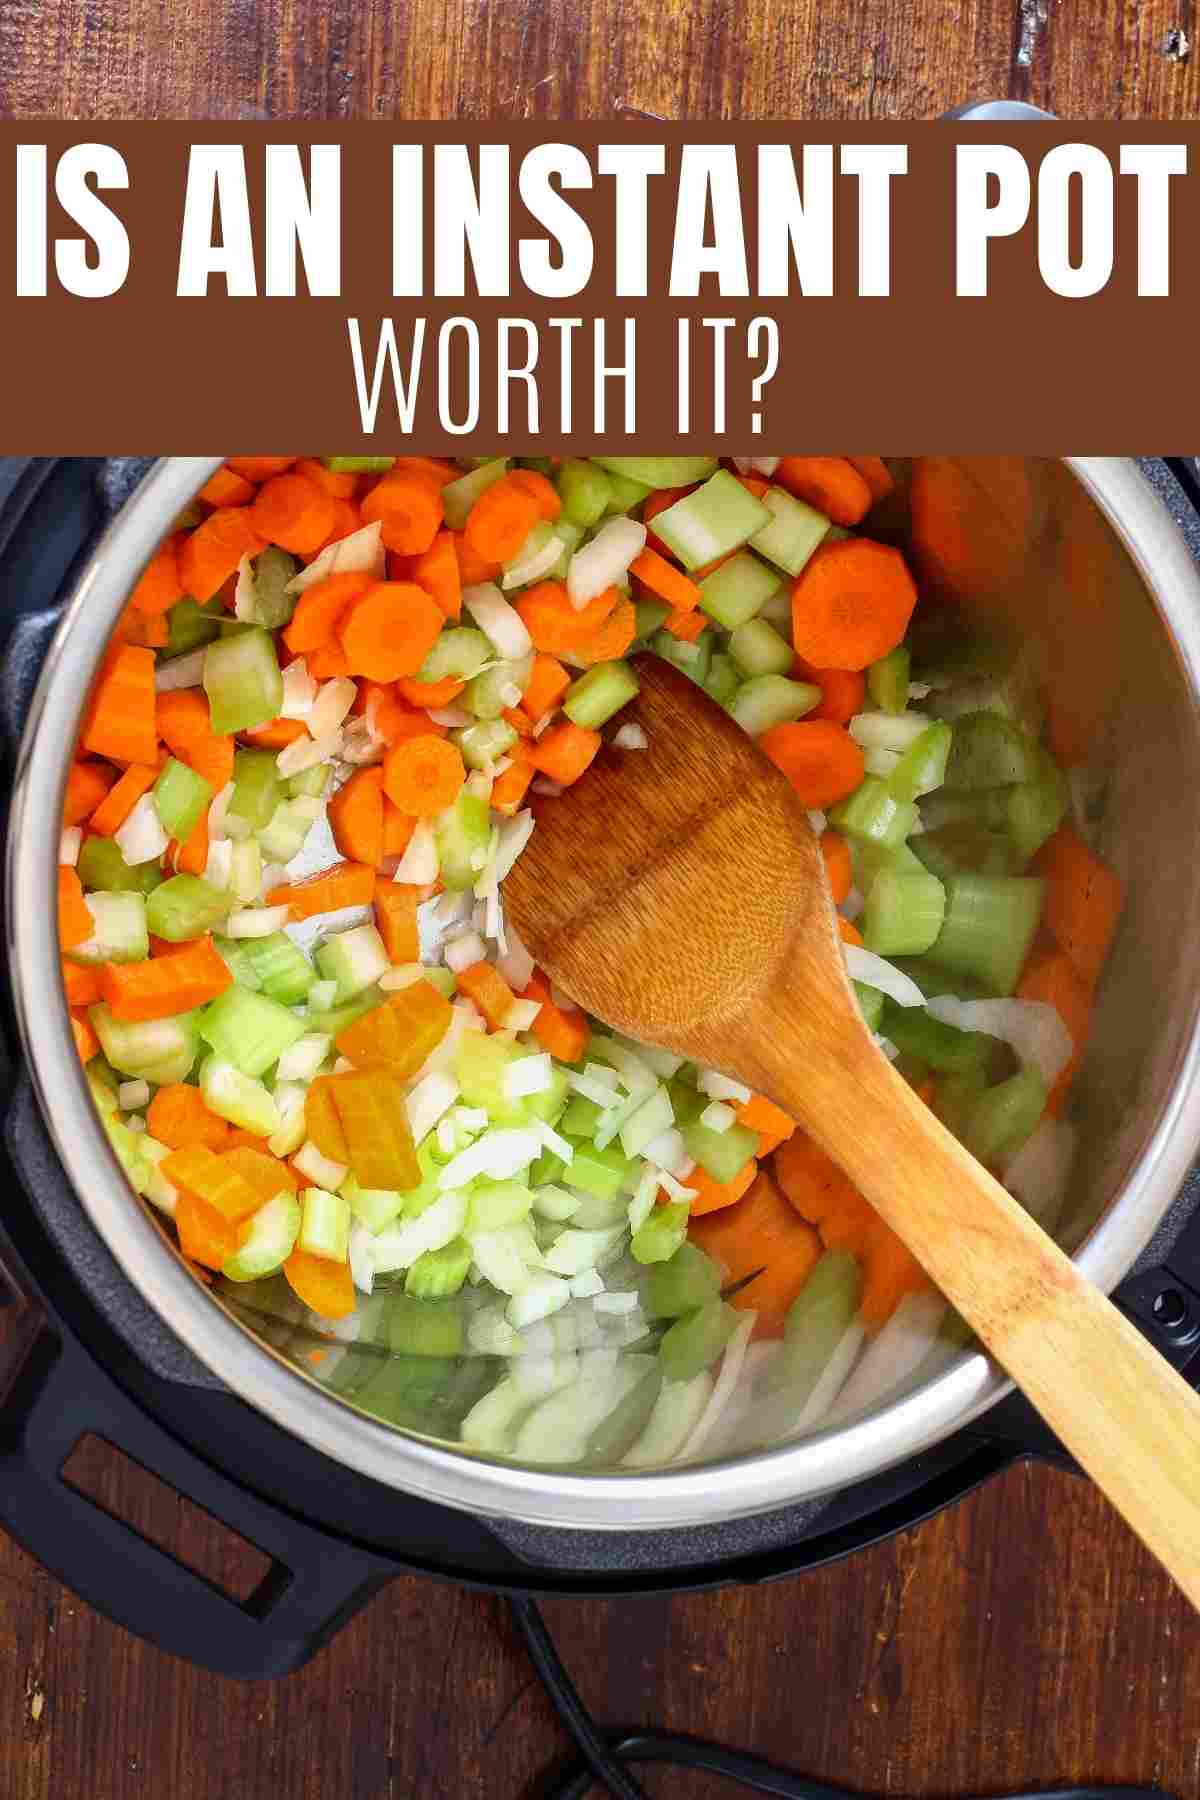 Is an Instant Pot really worth it